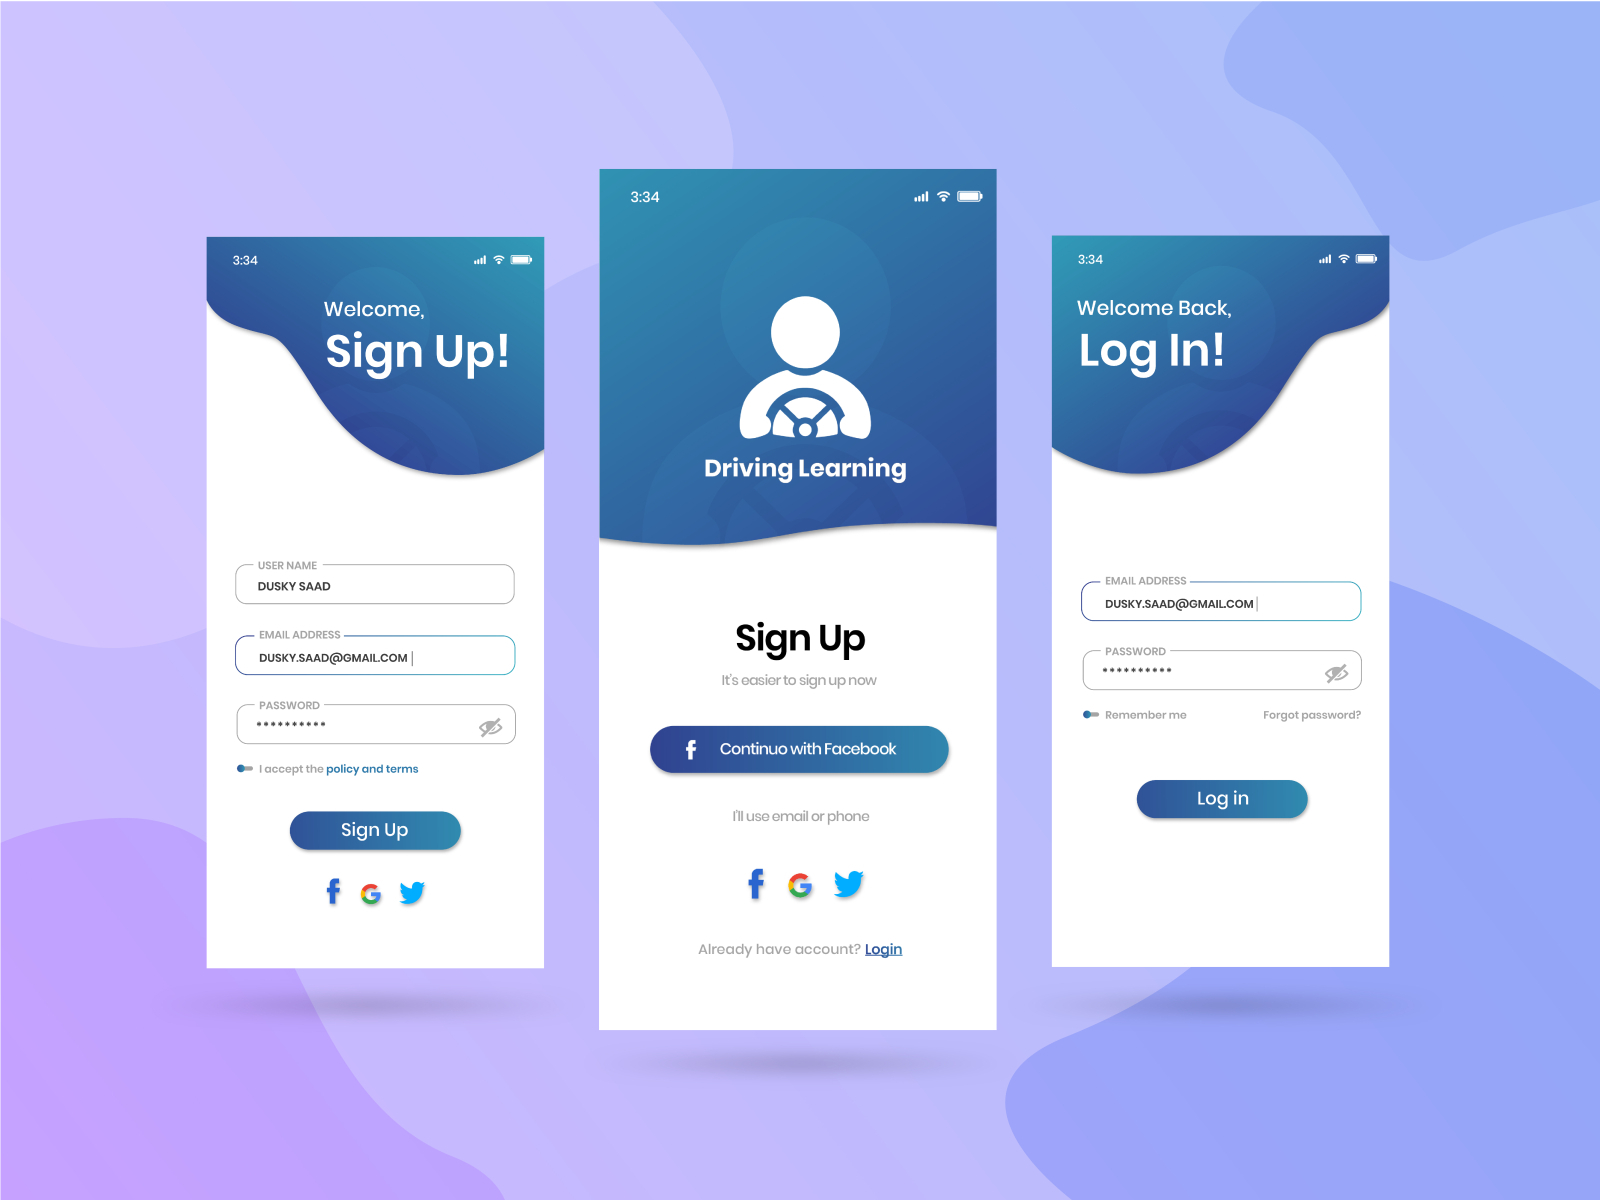 Sign Up And Login UI Template For Android And IOS By Duski Saad Hrp On Dribbble